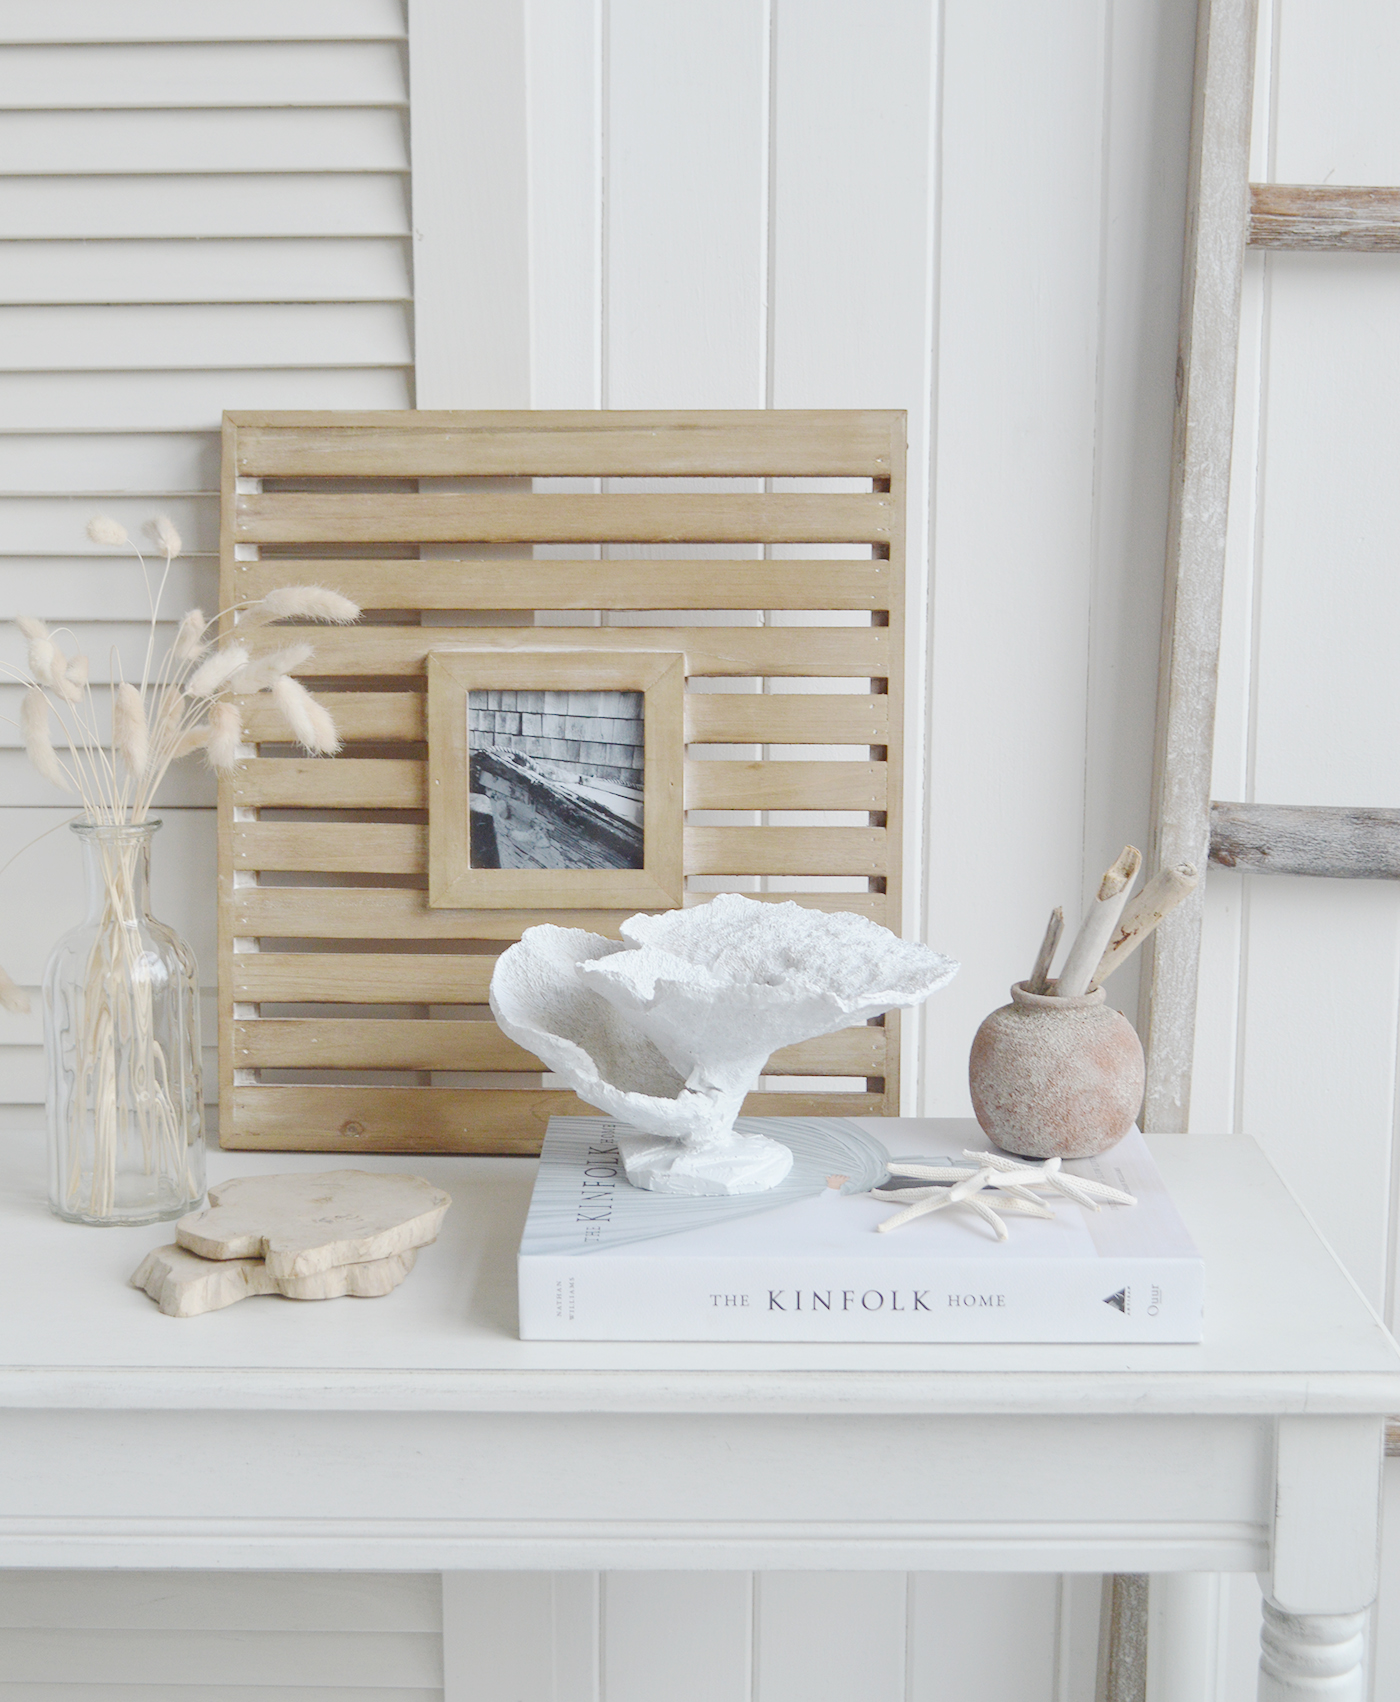 Weston Photo Frames - New England Coastal, Farmhouse, City and Country Furniture Homes and Interiors - Shiplap 4 x 4 oversized